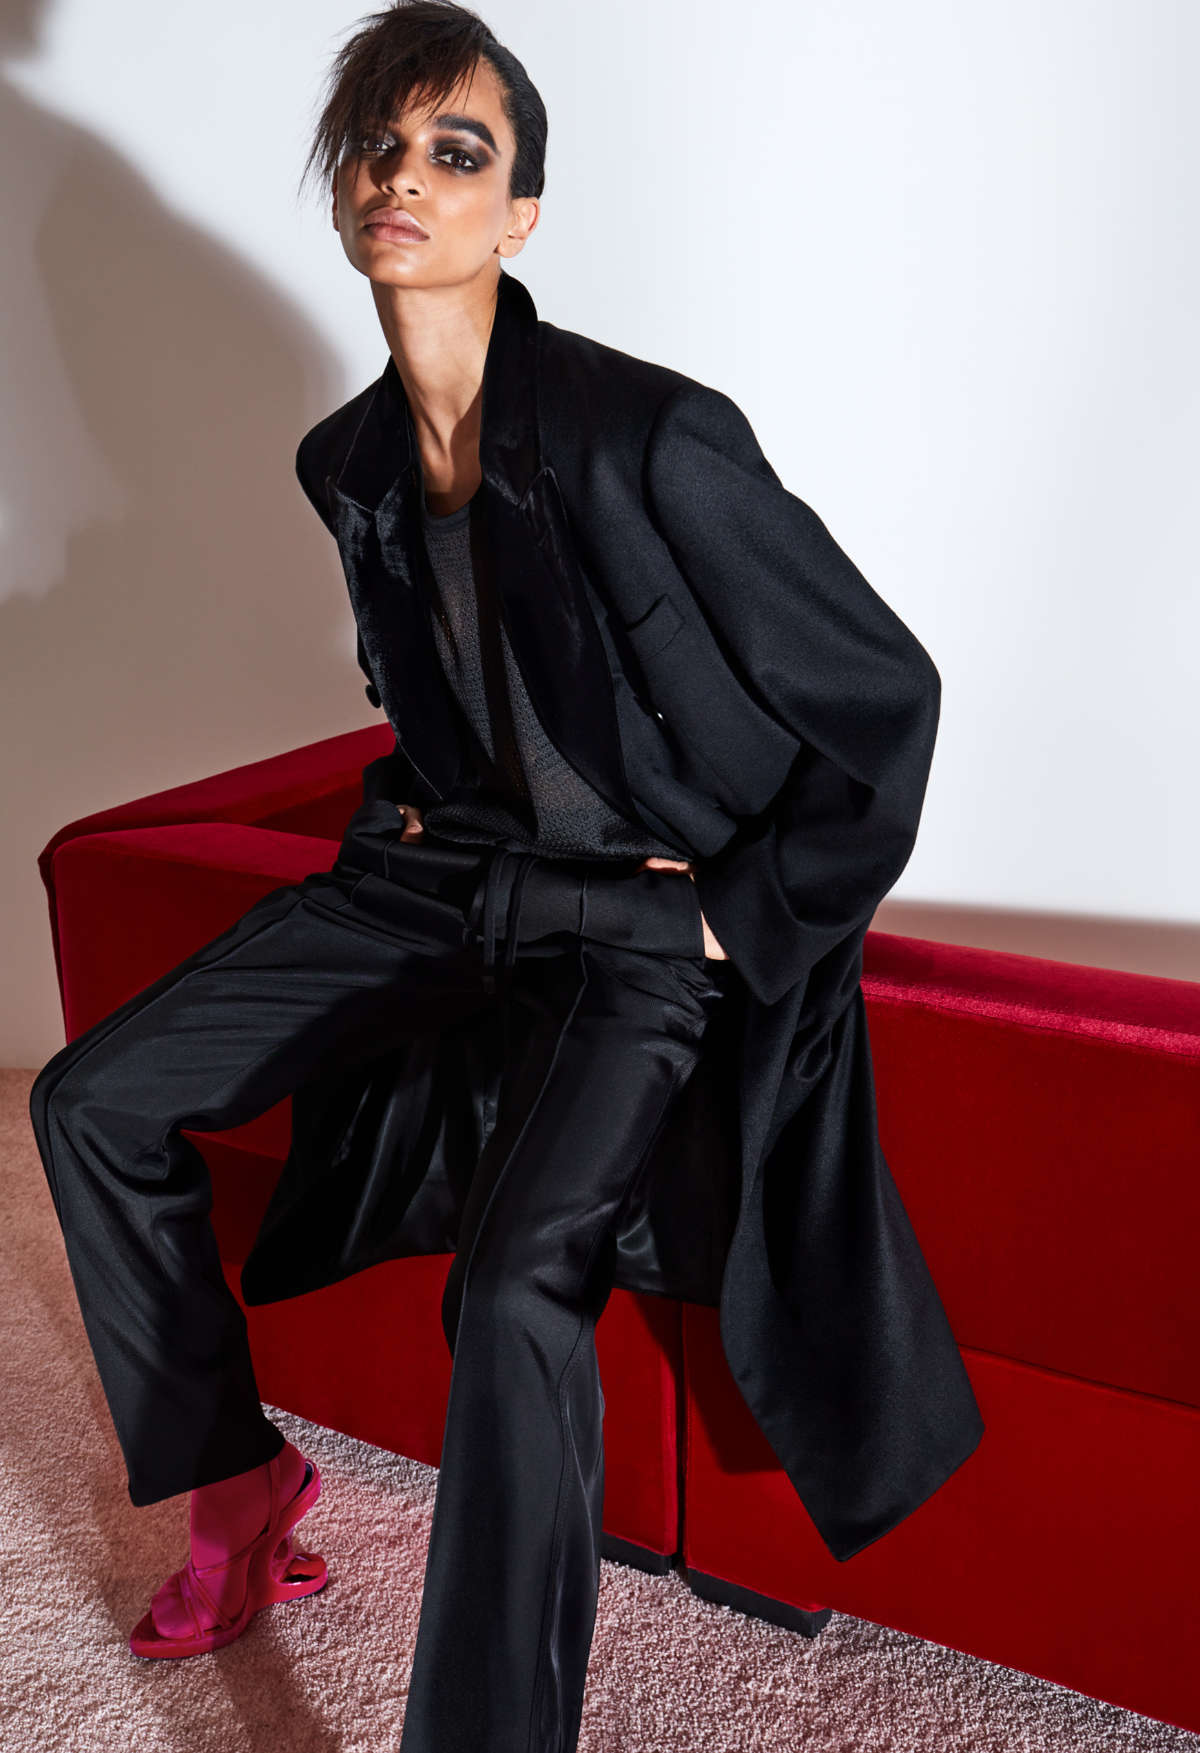 Tom Ford Presents His New Autumn/Winter 2022 Womenswear Collection